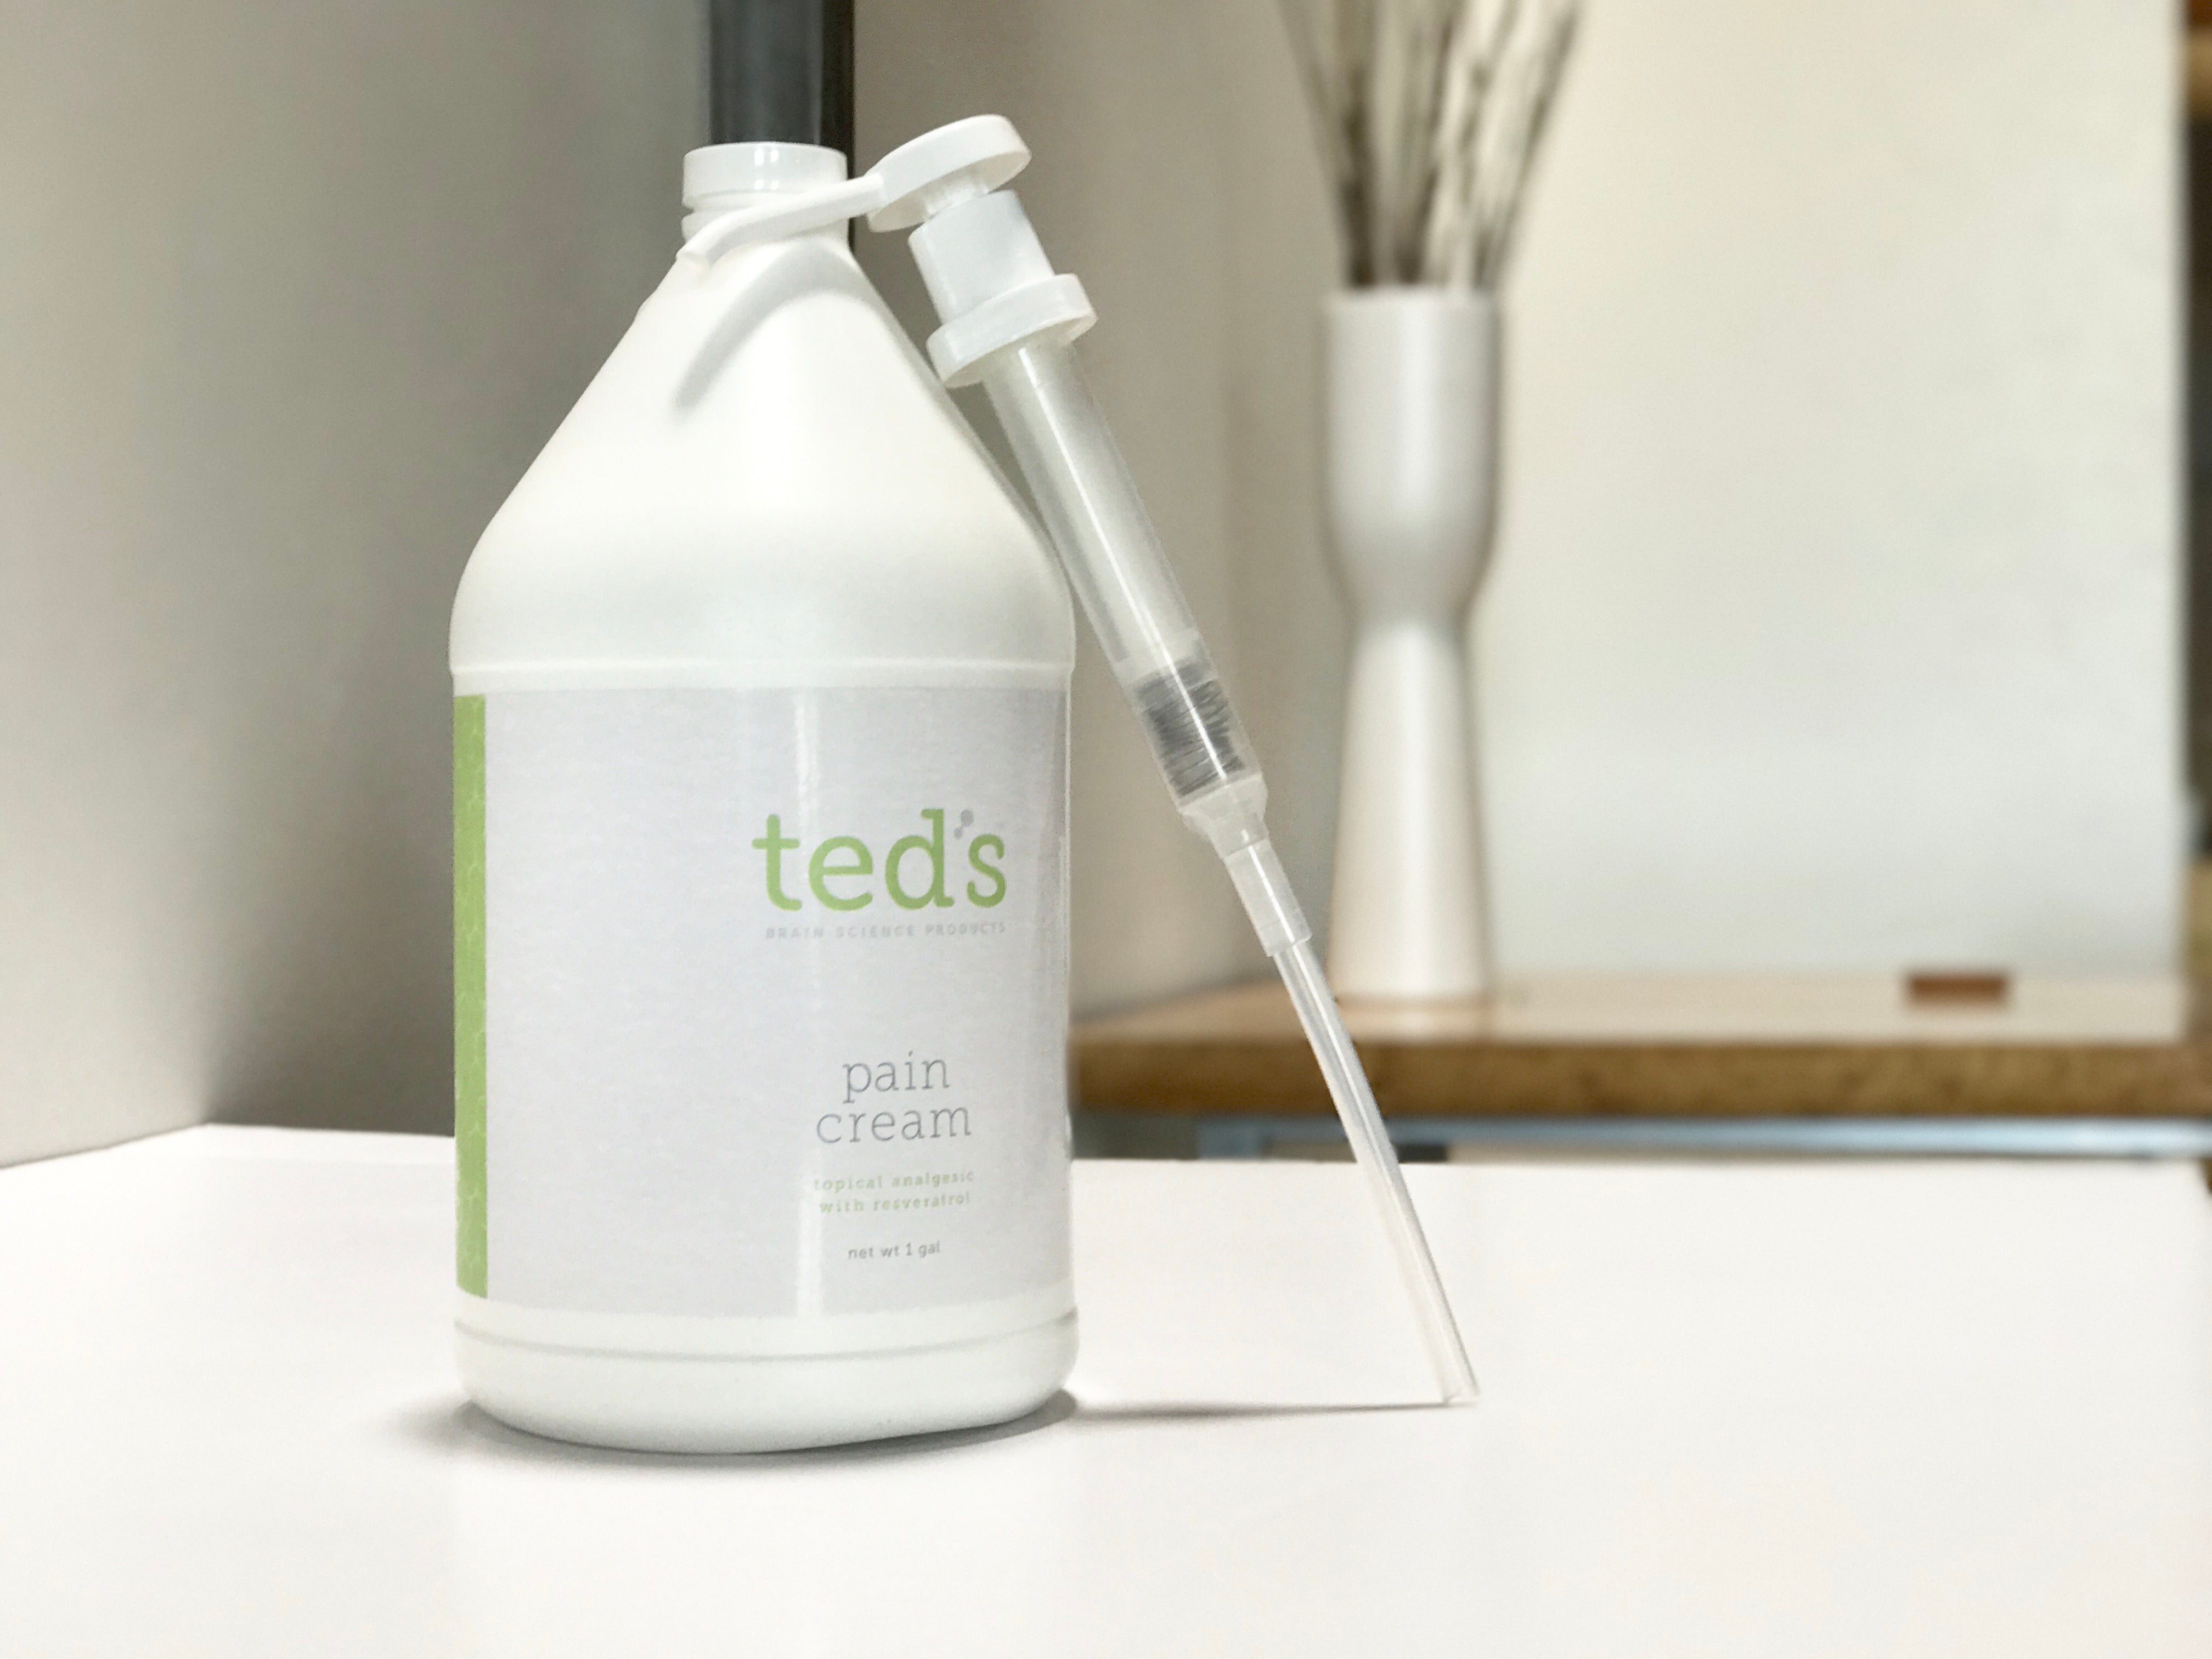 Ted's Pain Cream one gallon size